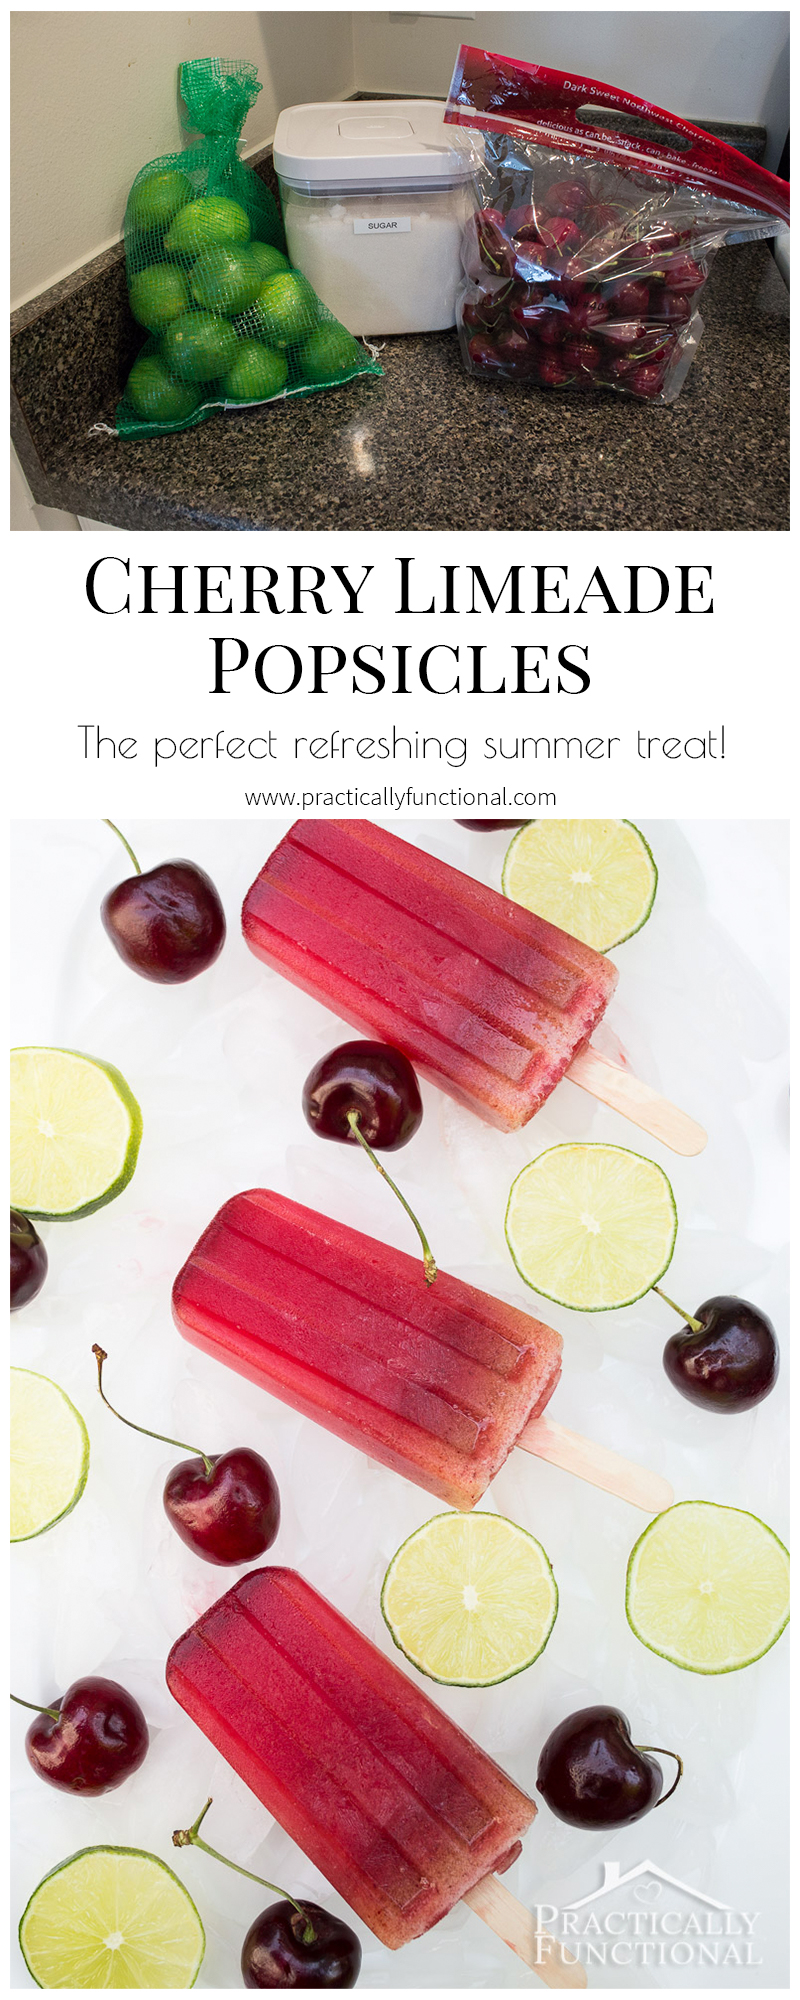 These homemade cherry limeade popsicles are the perfect refreshing summer treat!